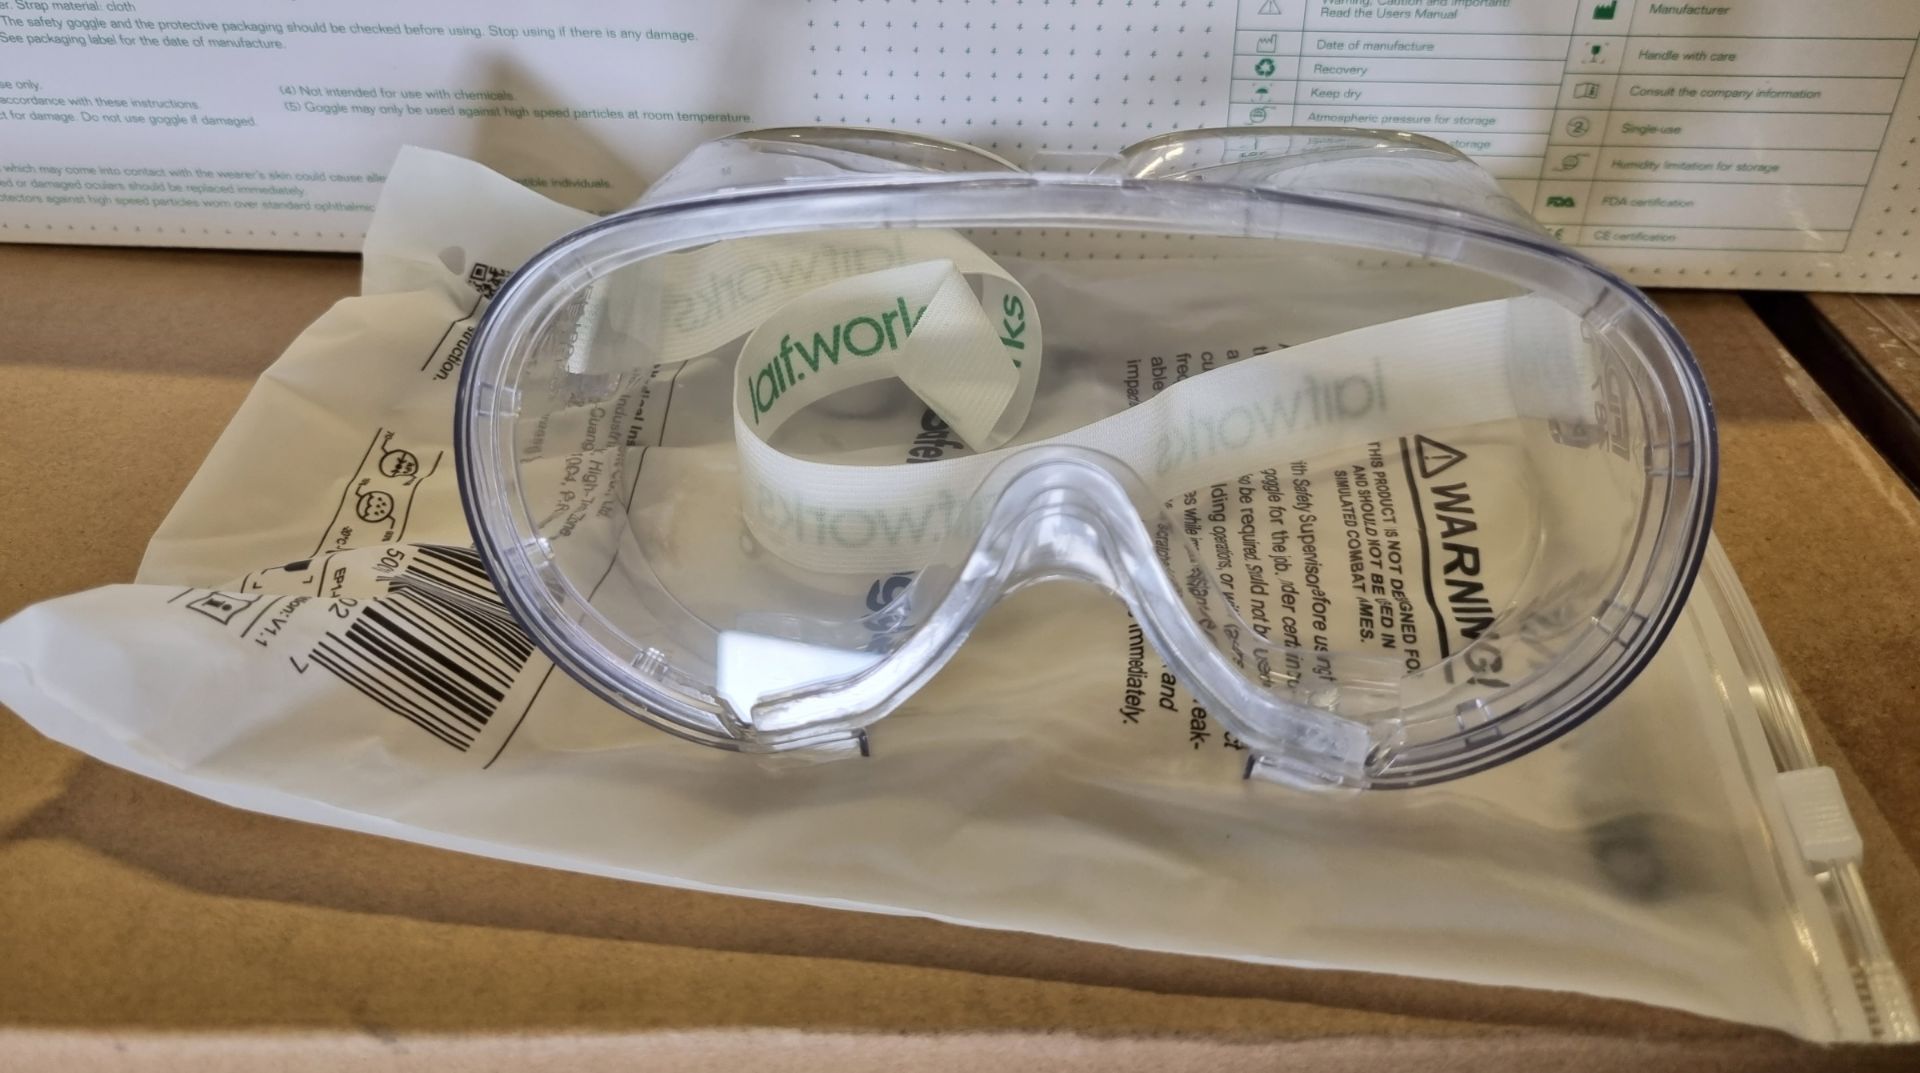 13x boxes of Laif.works clear eye protection safety goggles with adjustable strap - Image 4 of 6